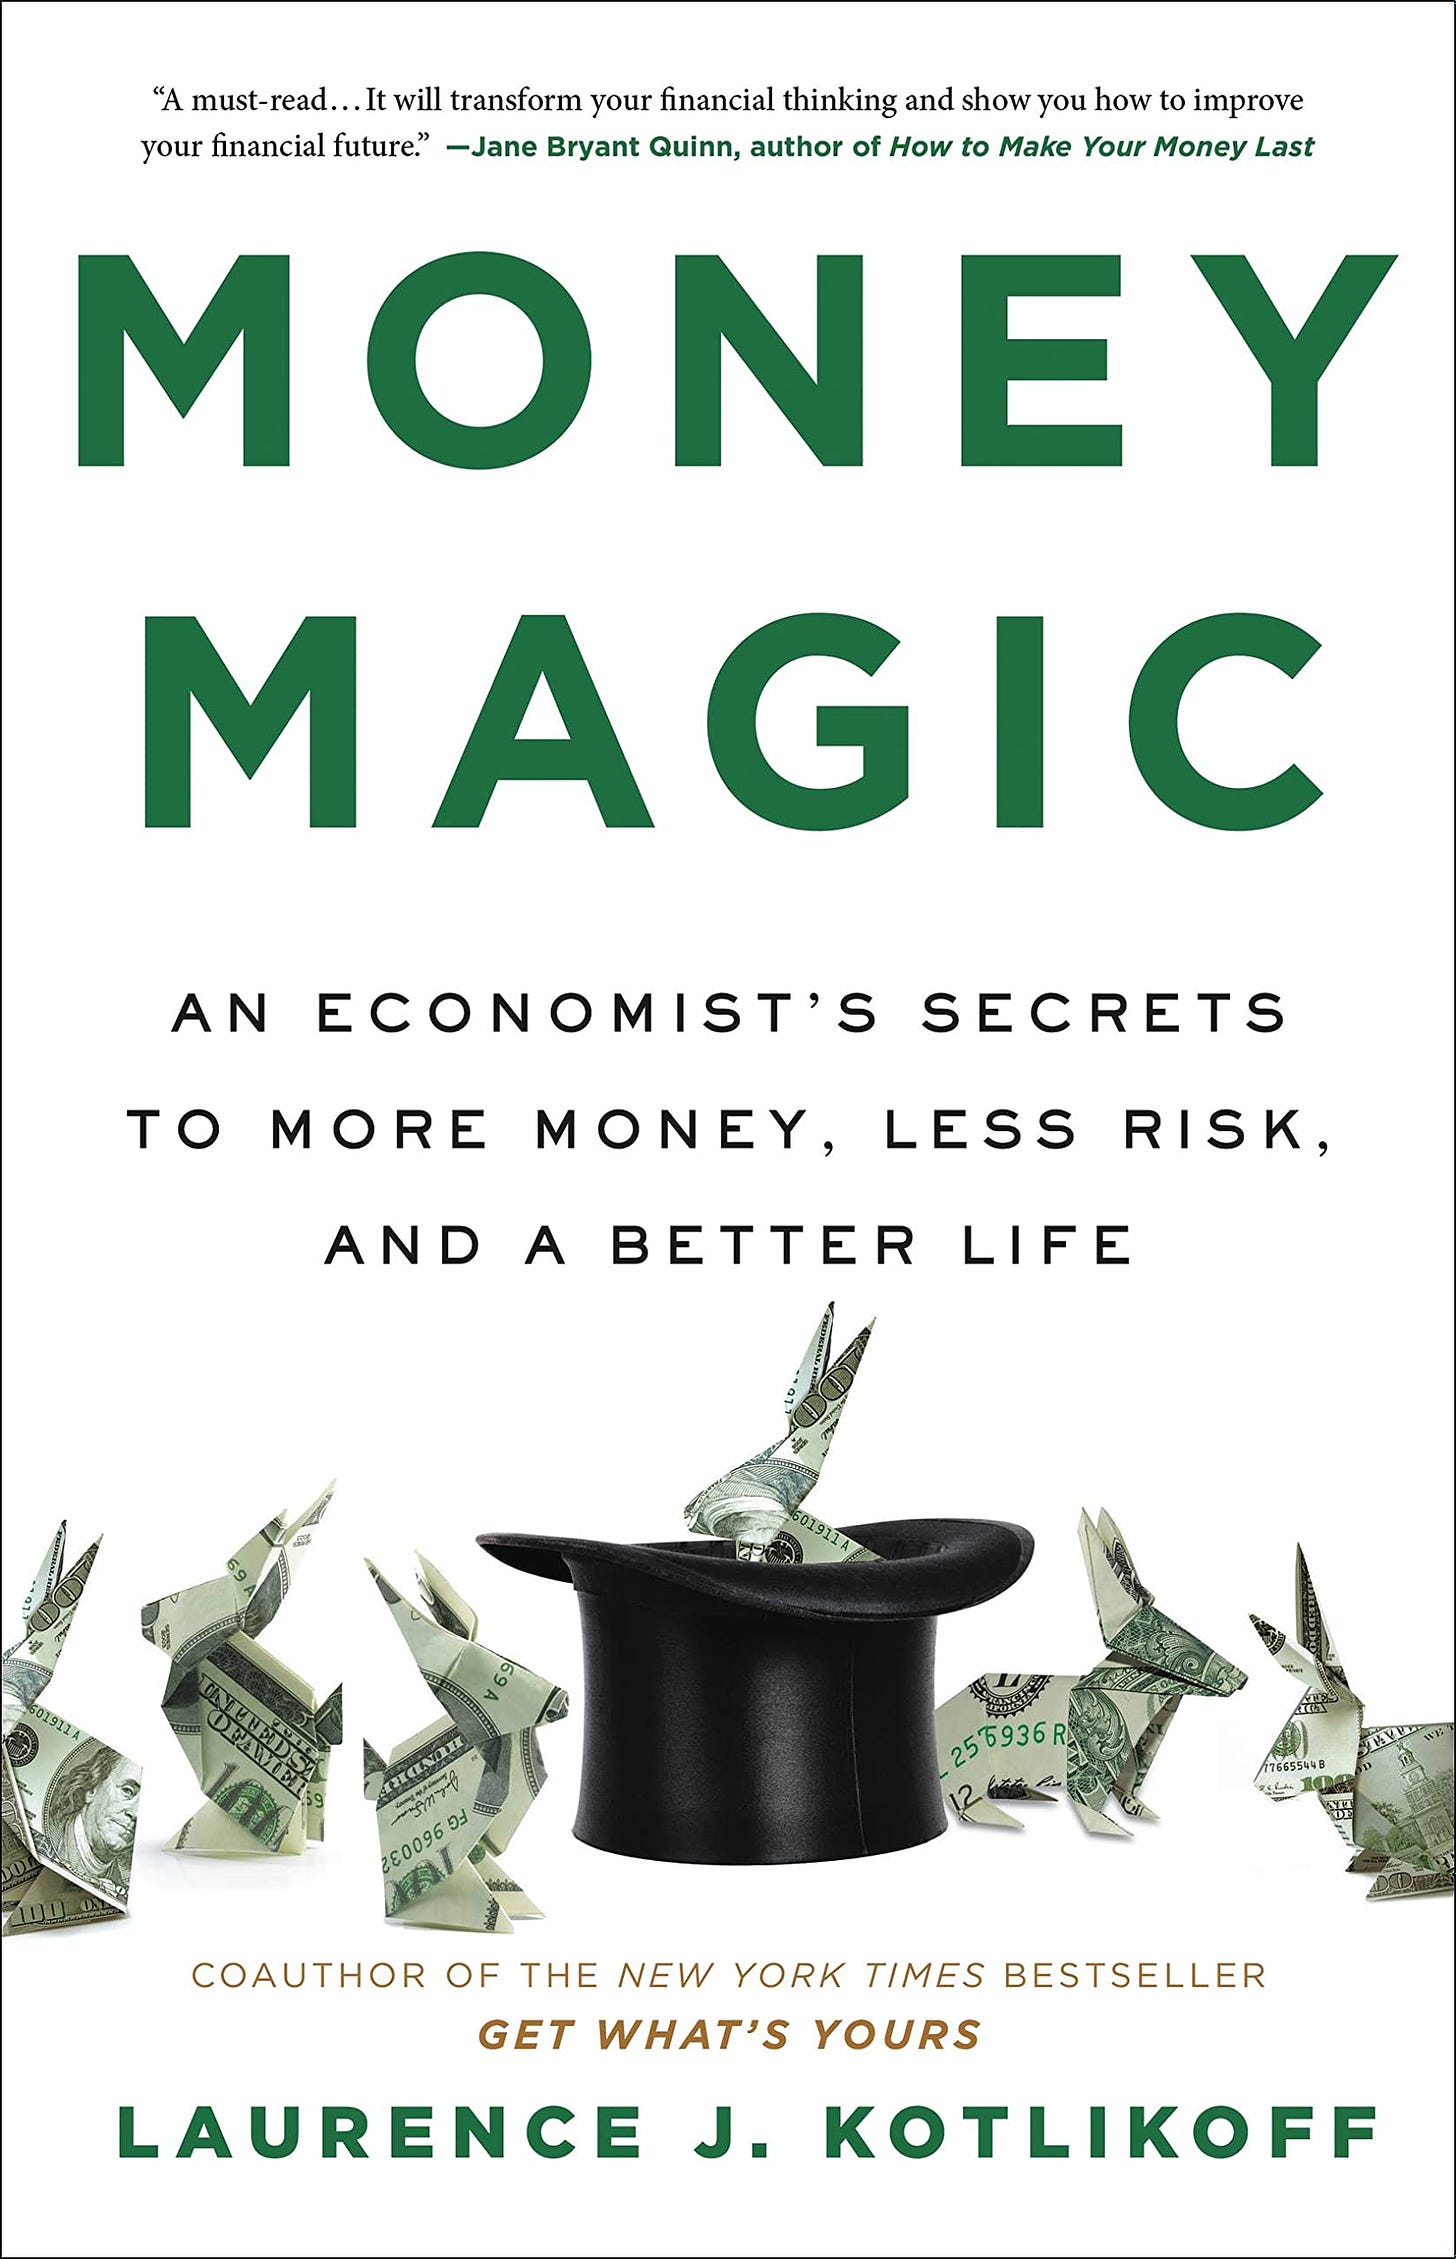 Money Magic: An Economist's Secrets to More Money, Less Risk, and a Better  Life: Kotlikoff, Laurence: 9780316541954: Amazon.com: Books